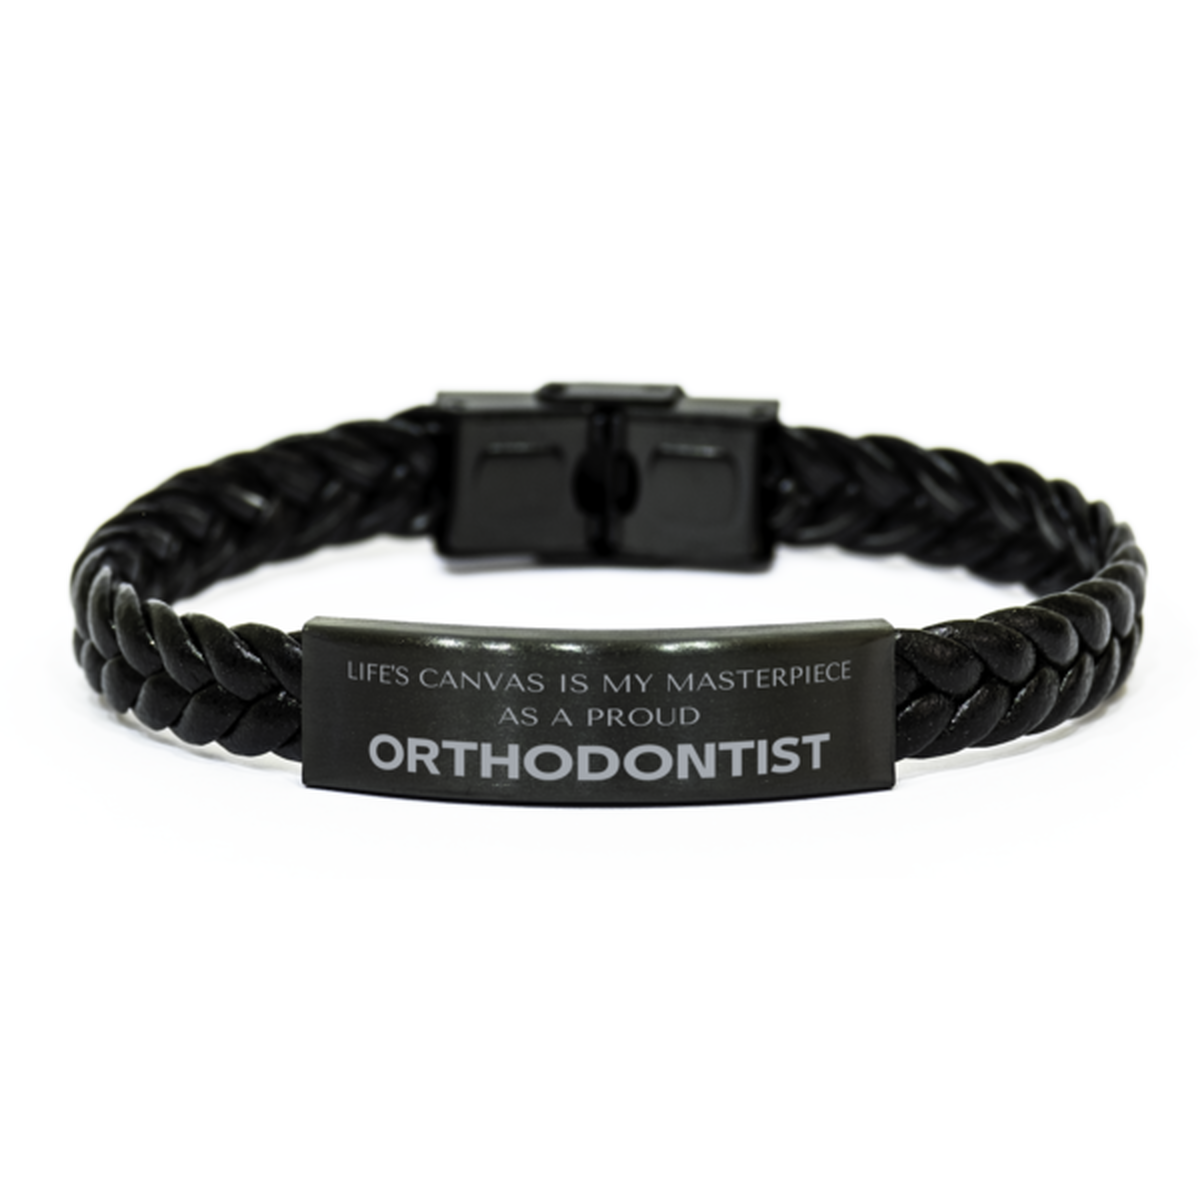 Proud Orthodontist Gifts, Life's canvas is my masterpiece, Epic Birthday Christmas Unique Braided Leather Bracelet For Orthodontist, Coworkers, Men, Women, Friends